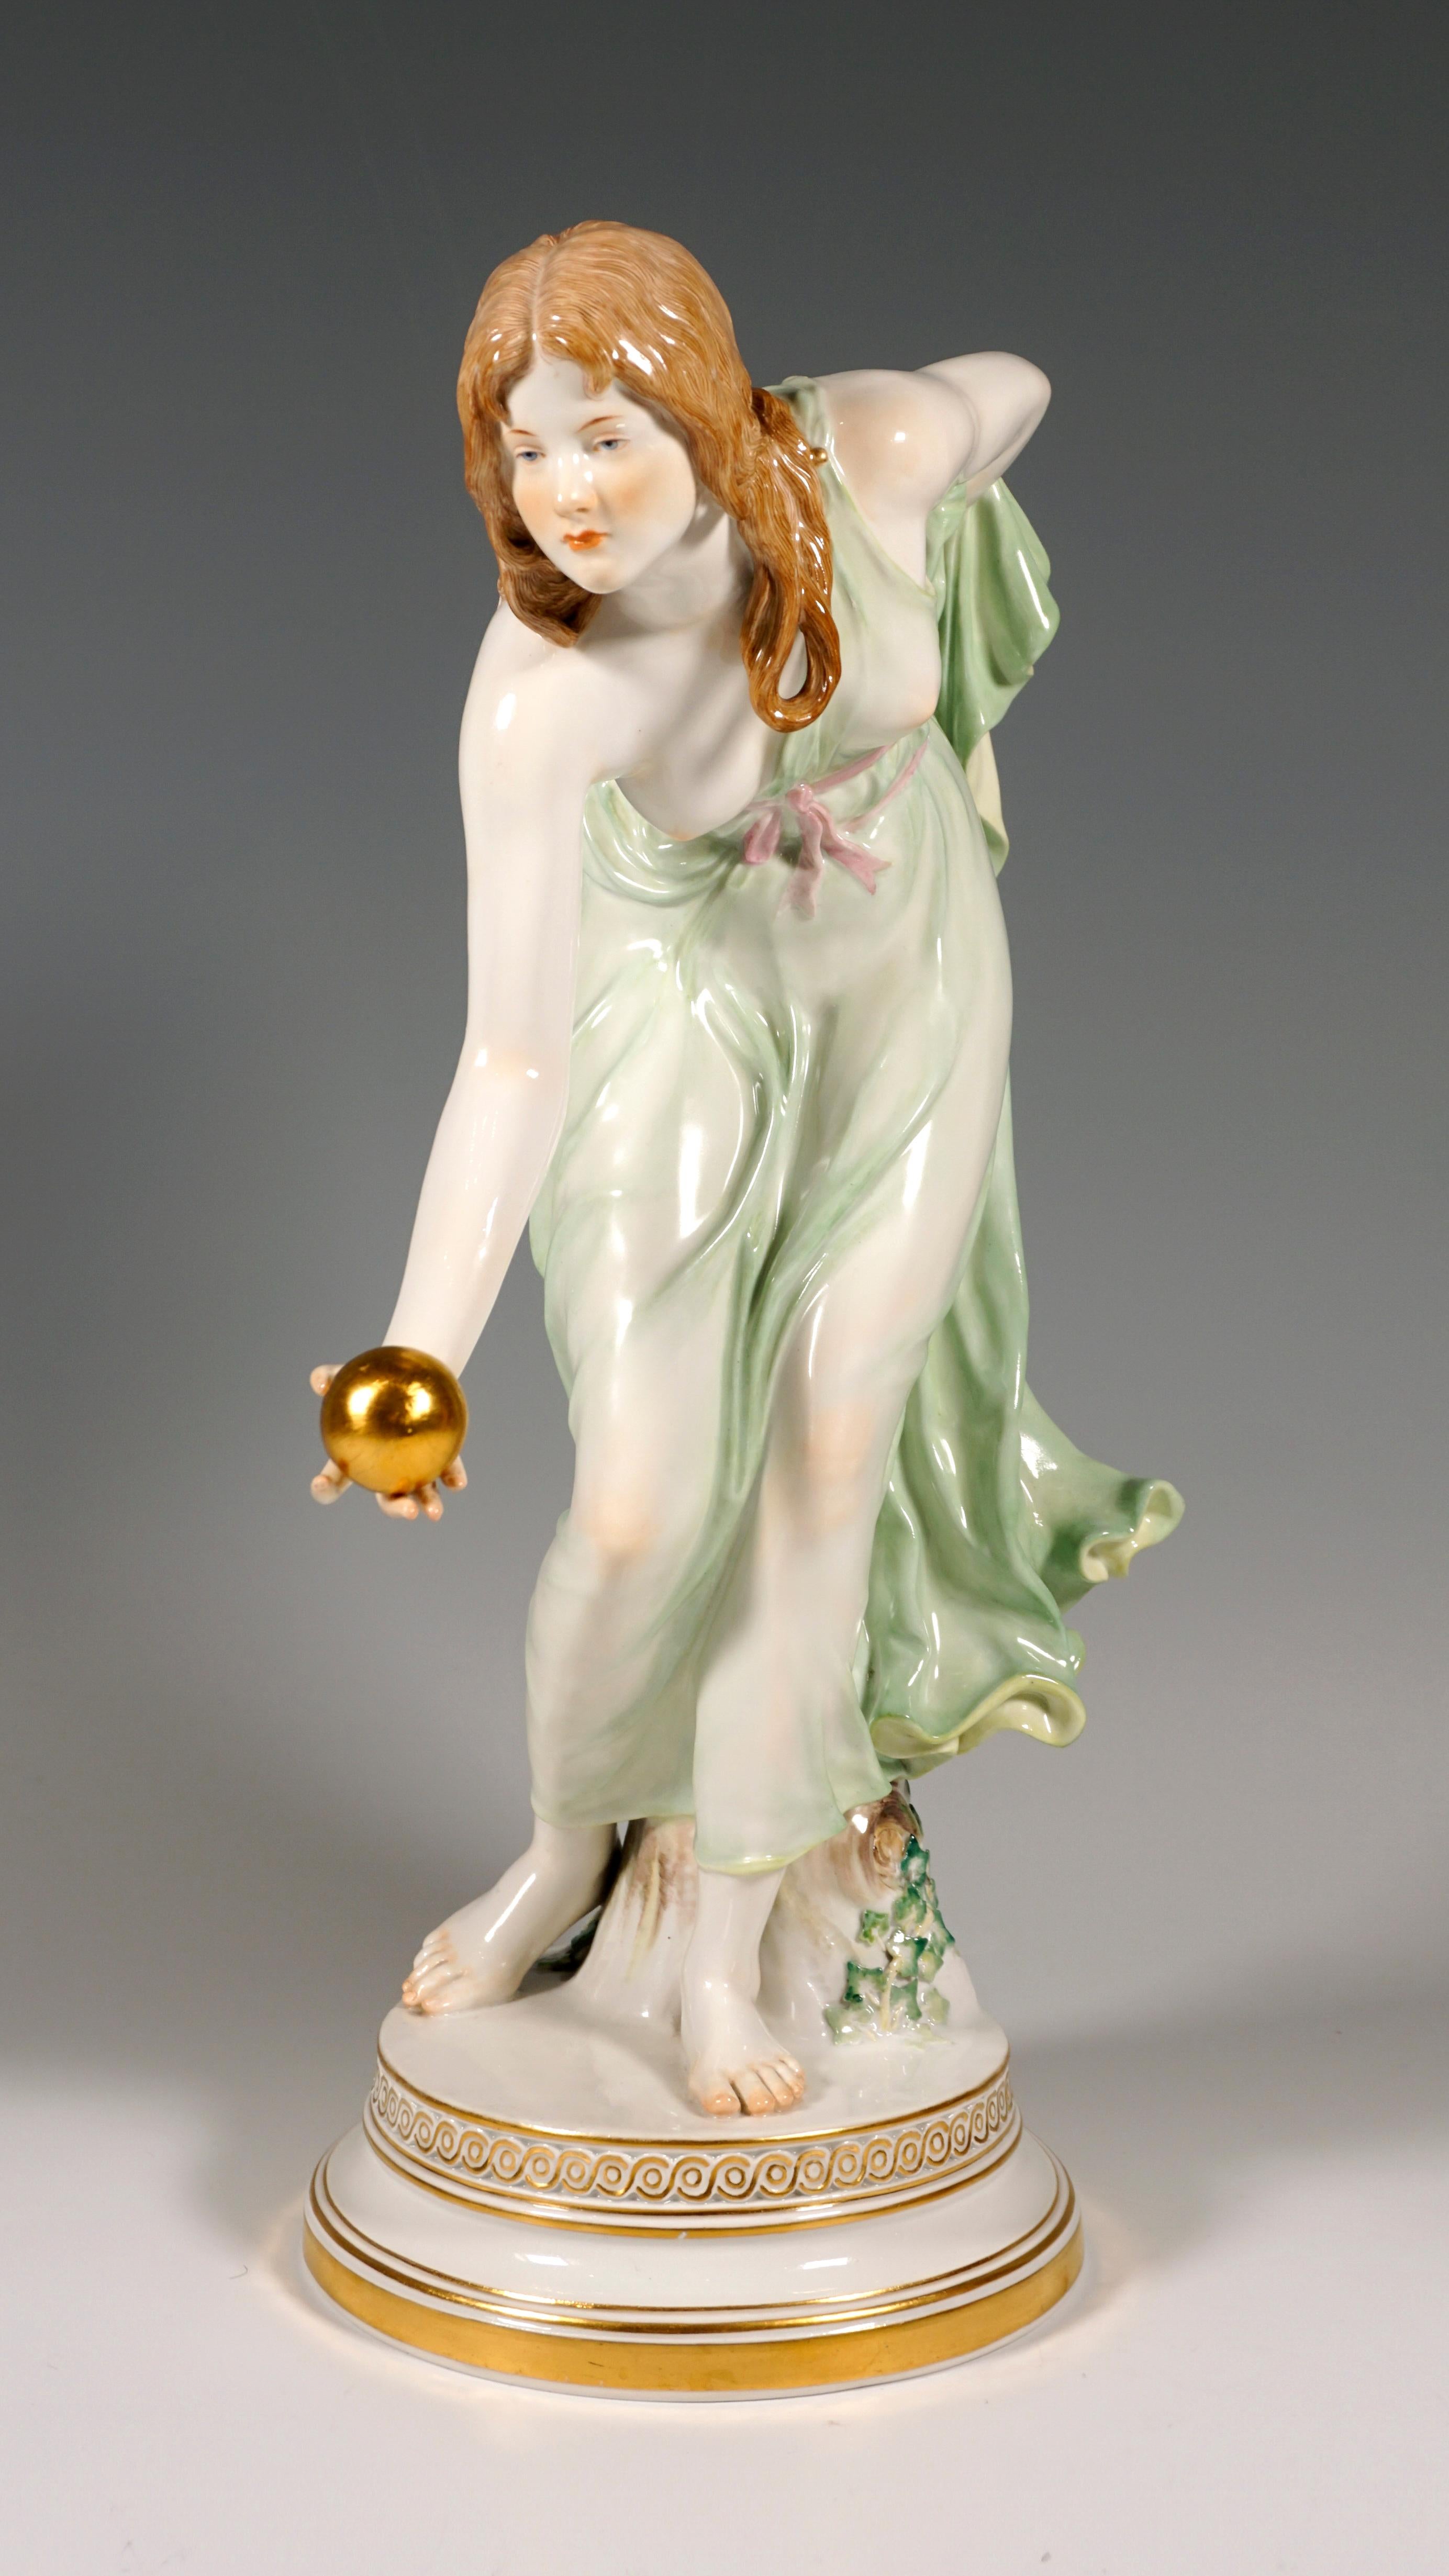 Extremely decorative, fully sculptural representation of an Art Nouveau beauty with a bared breast, in a softly falling robe, tilted forward to throw a golden ball, with the left forearm holding the back hem of the dress on her back.
The figure is